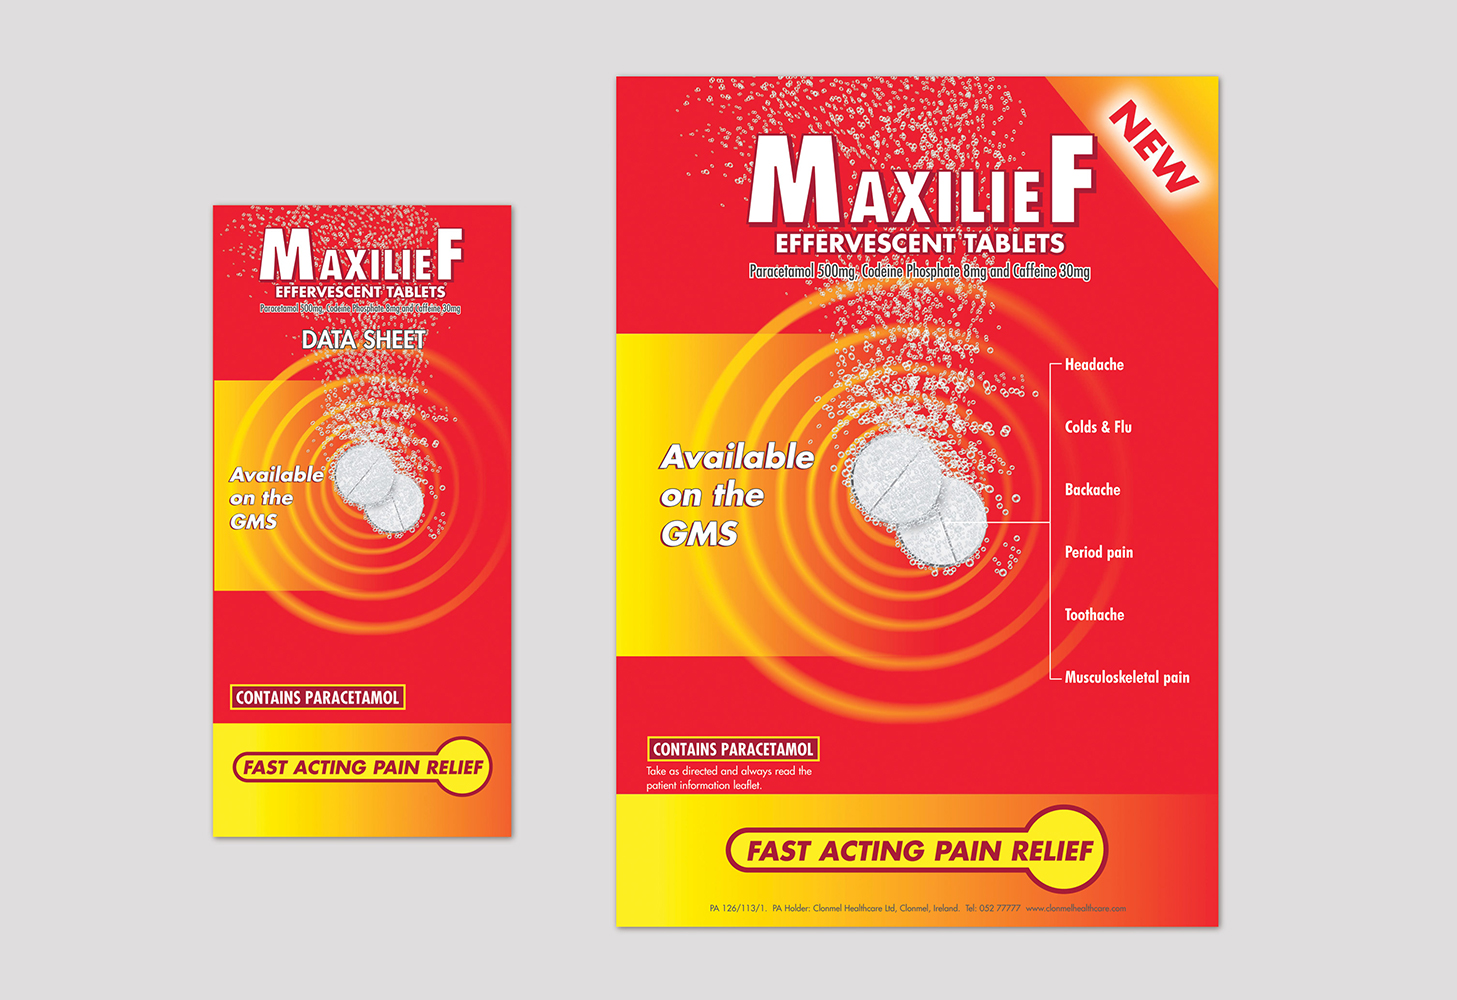 Maxilief Adverts, Data Sheets, Promotional Materials